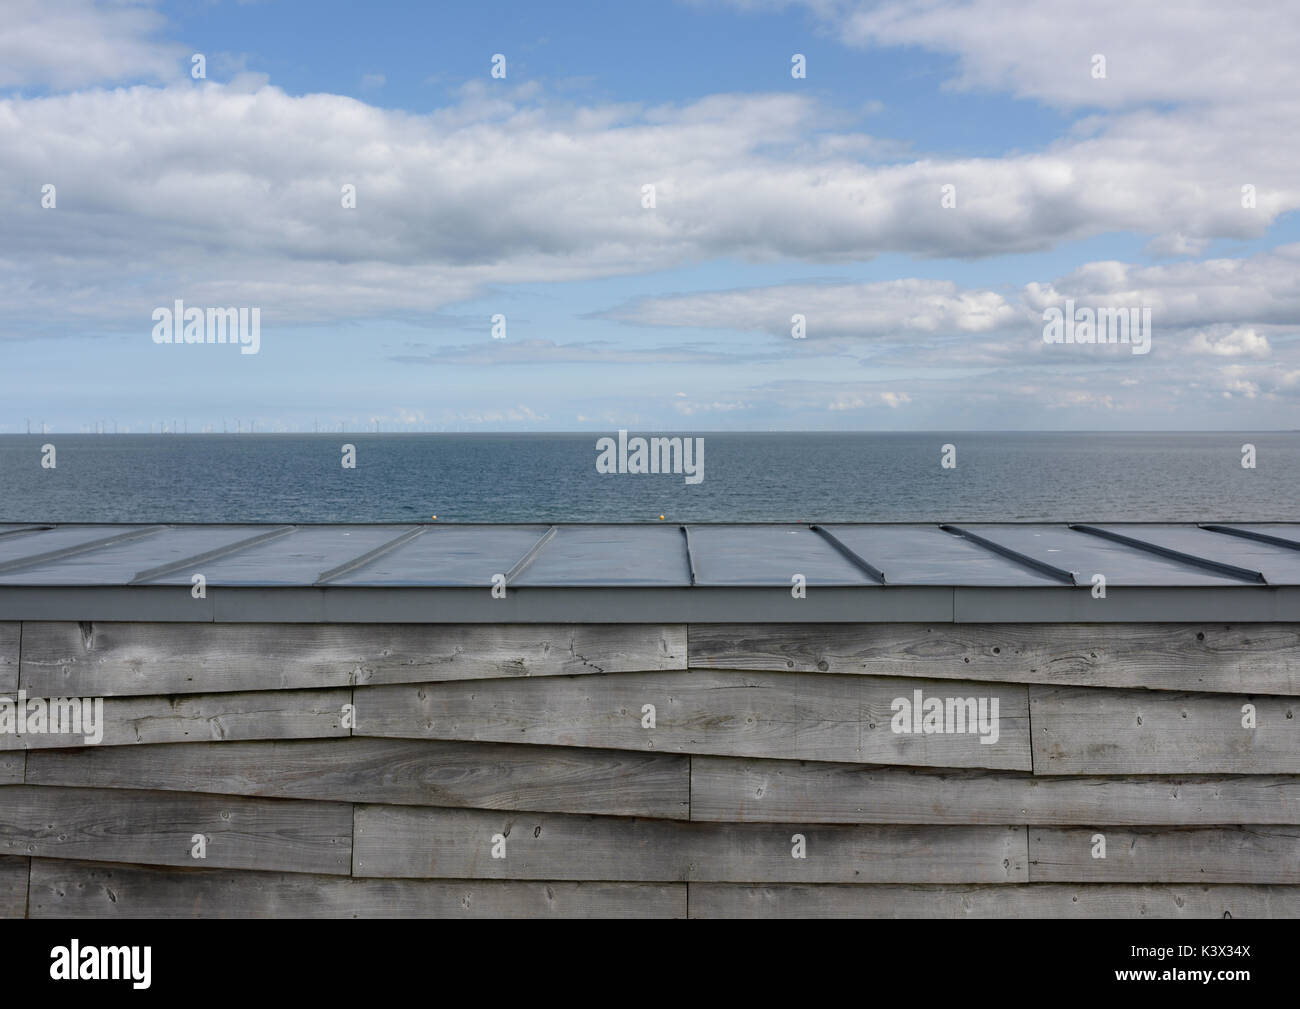 Timber cladding roof viewing platform at Porth Eirias looking out to sea in north wales uk Stock Photo